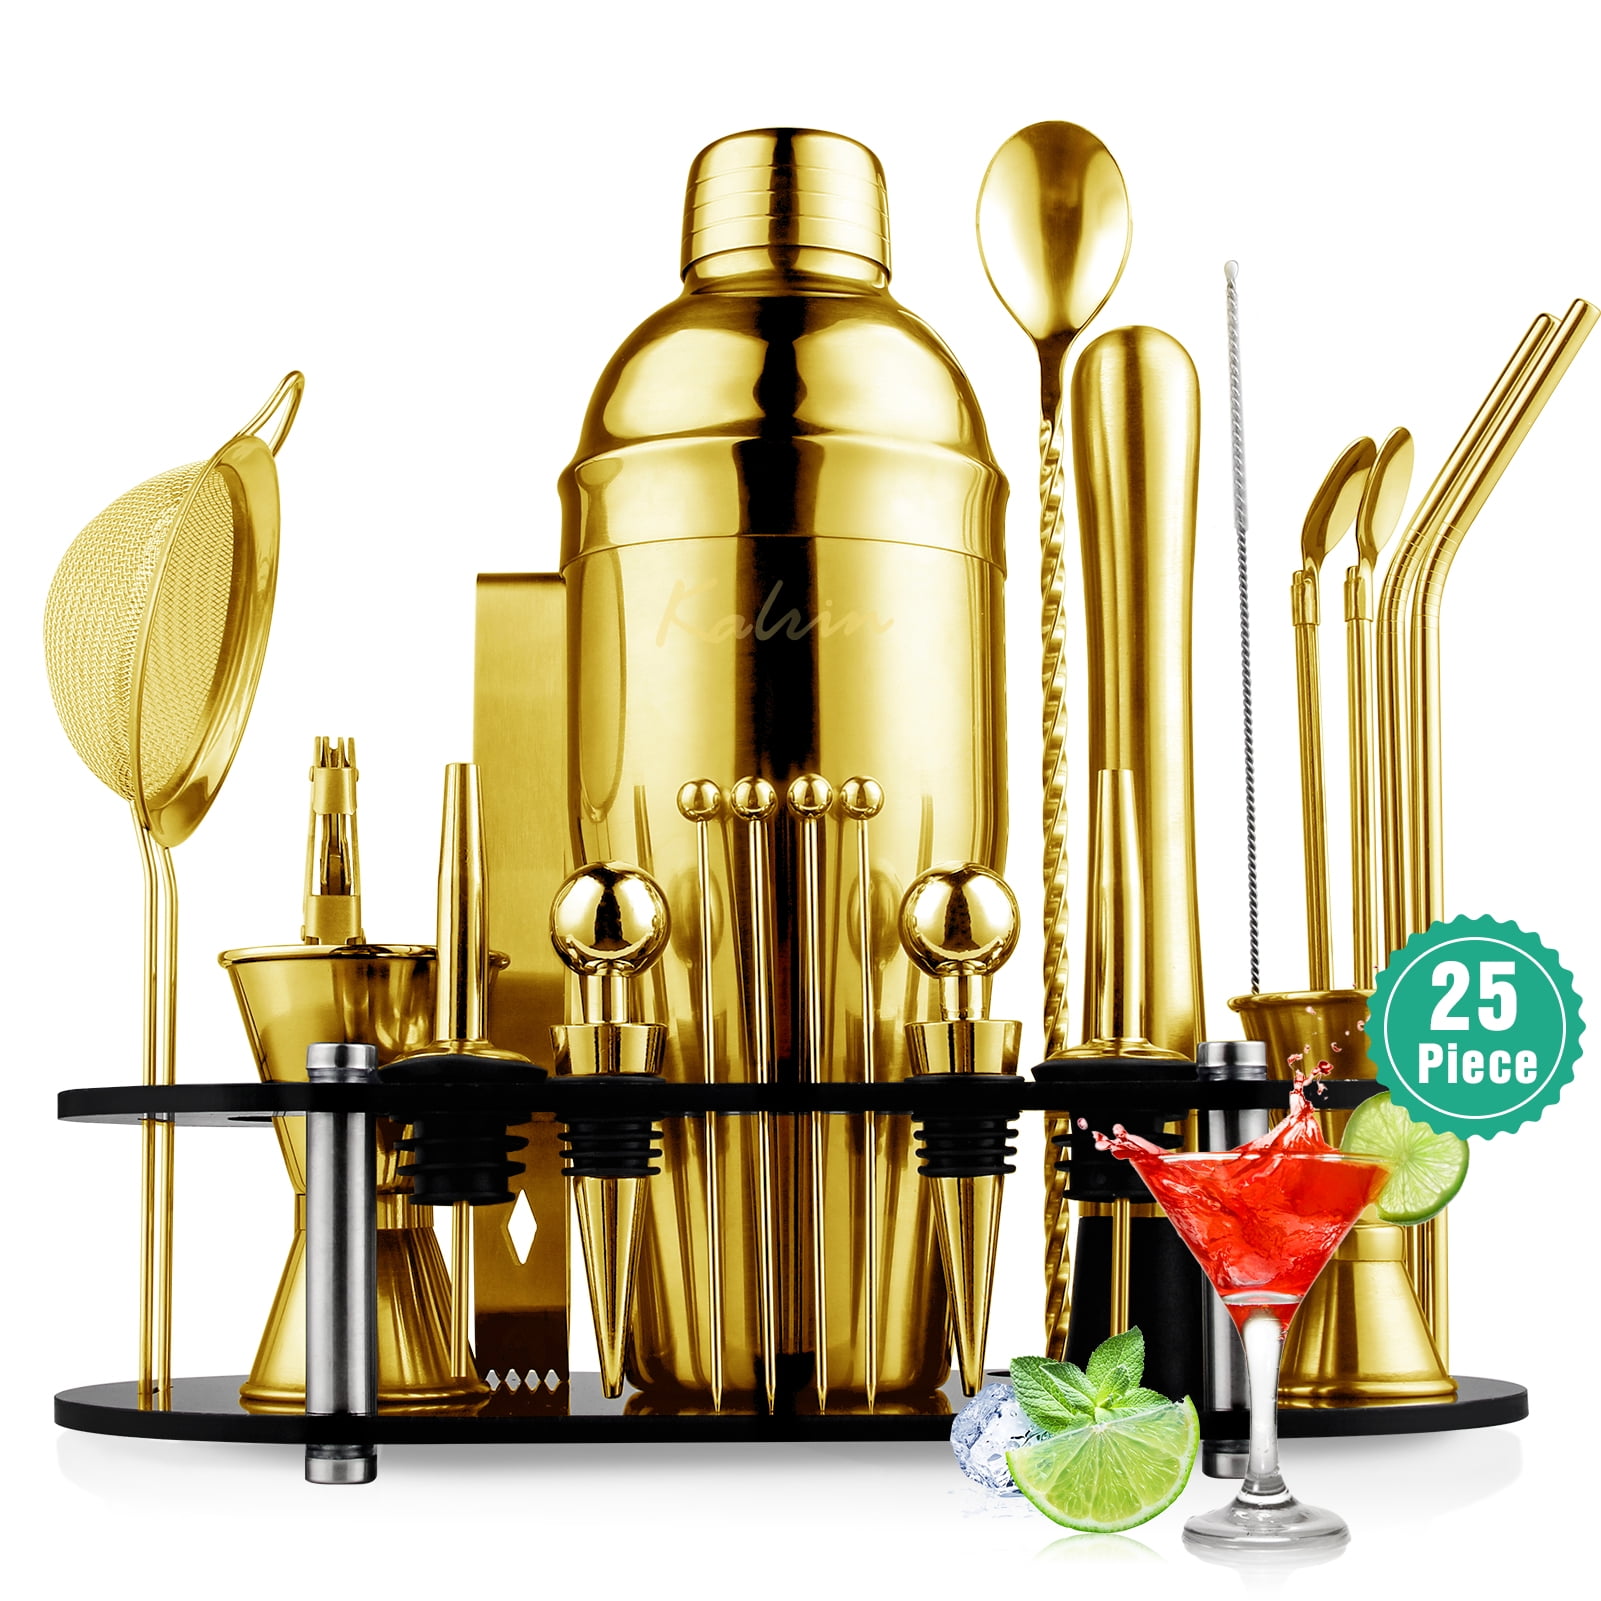 Btuqbu Cocktail Shaker Set with Arcylic Stand, Mixology Bartender Kit for  Drink Mixing | Mixology Set with 7 Bar Set Tools Cocktail Kit (Gold)